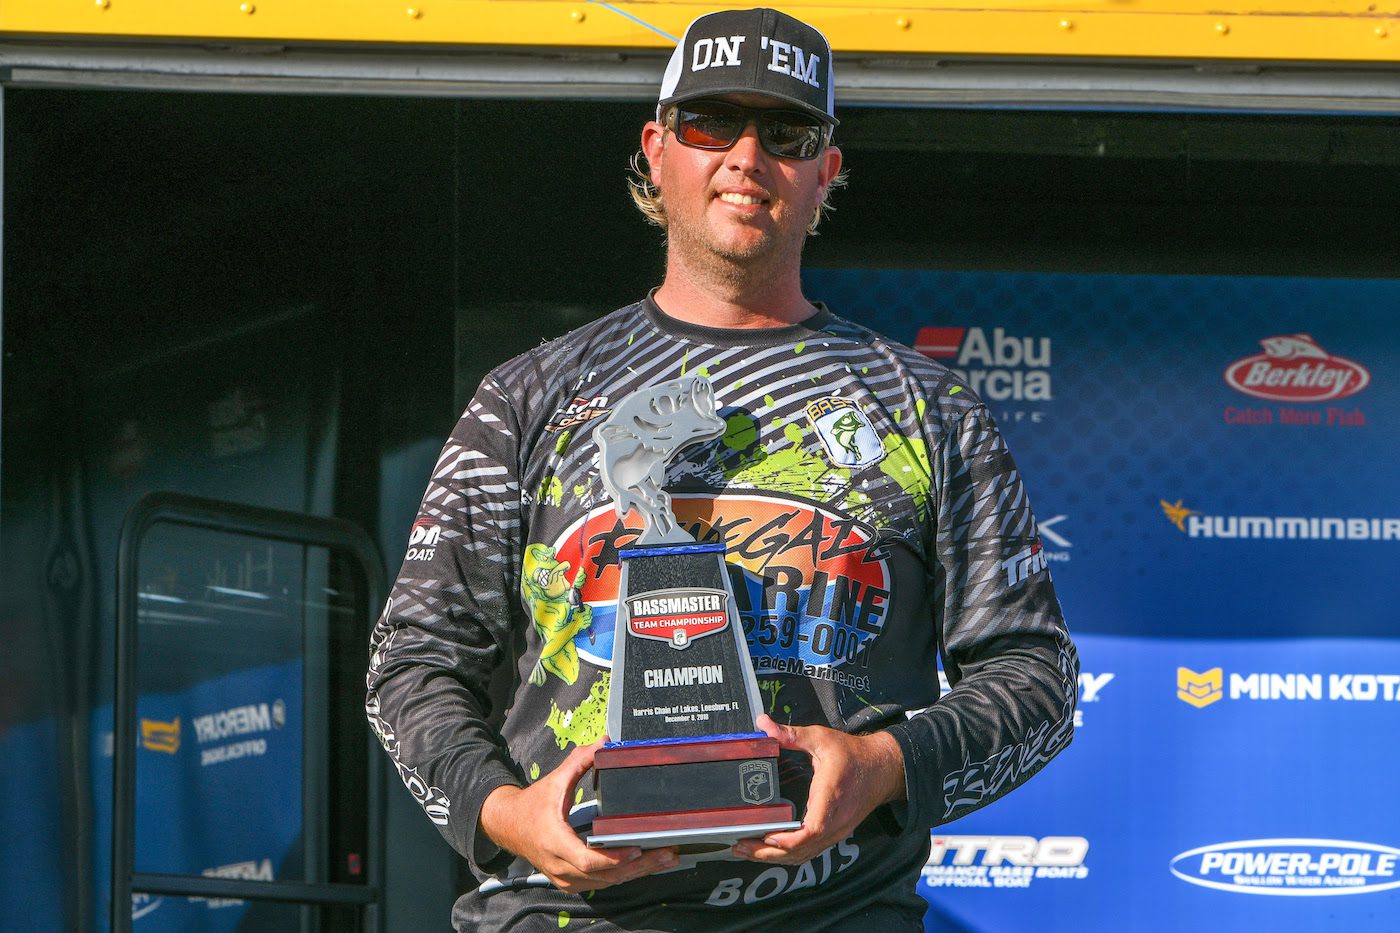 Team Tournament Angler Fulfills Dream To Qualify For The Bassmaster Classic